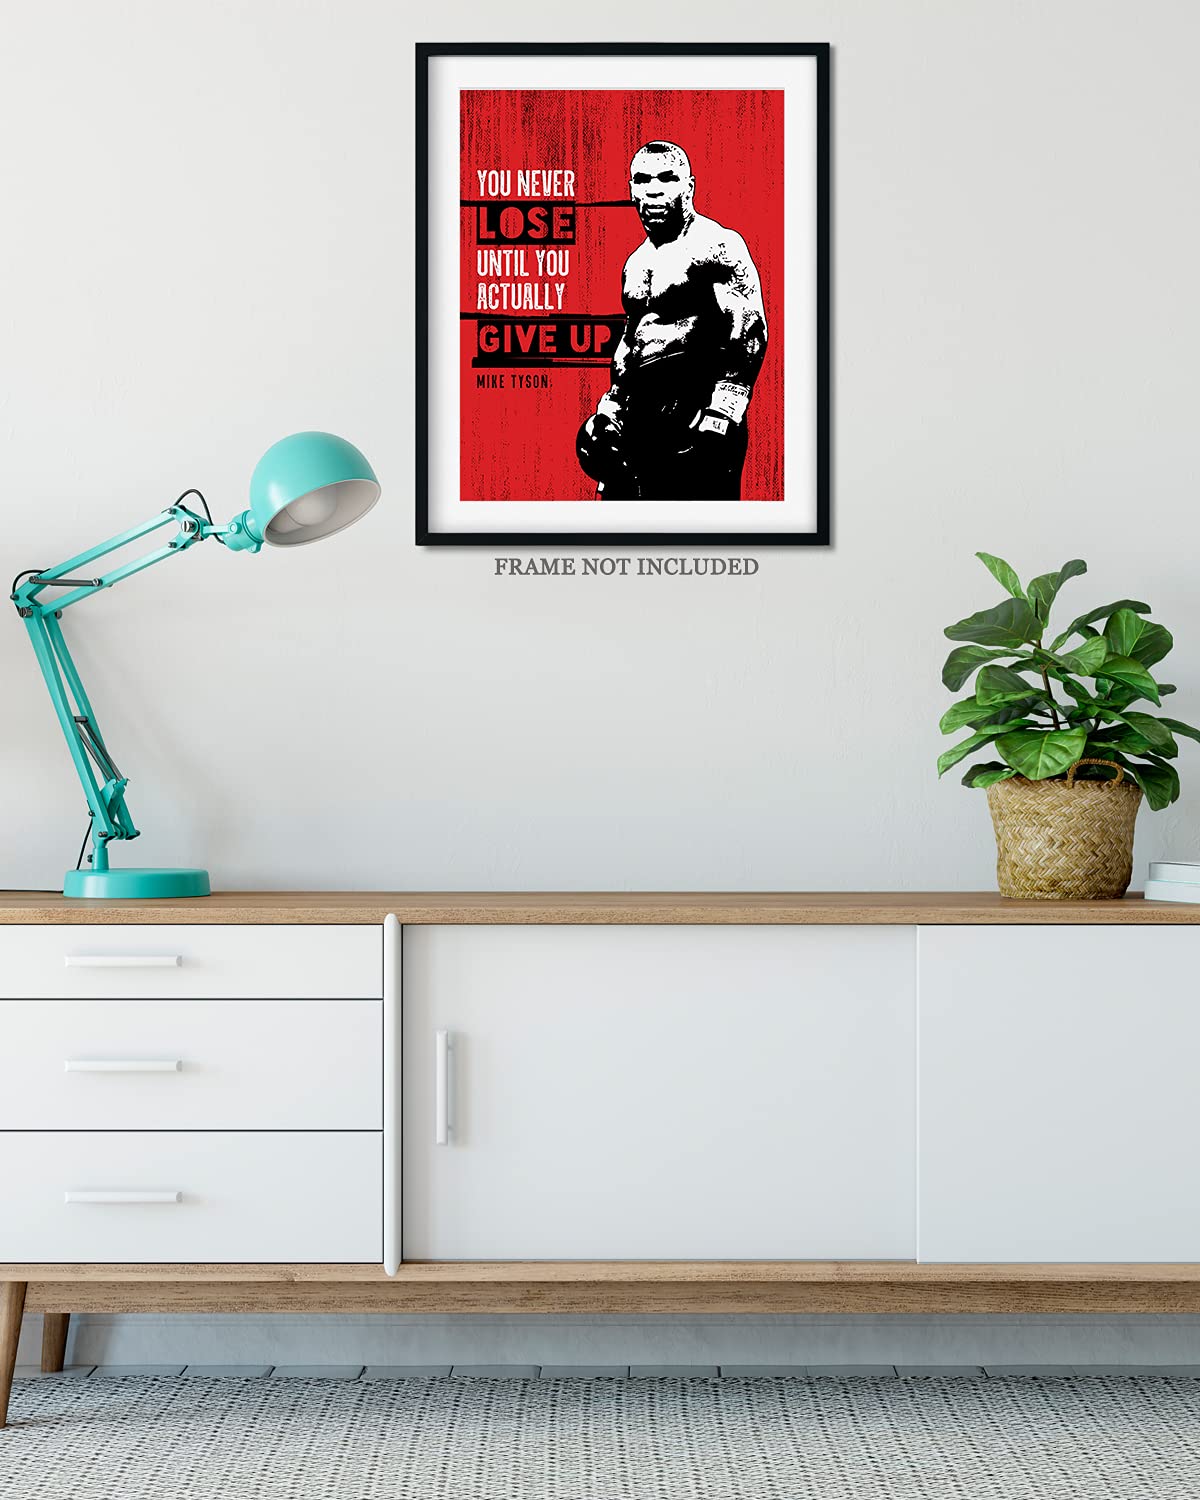 Motivational Sports Quotes - Boxing Poster, Print or Canvas - Mike Tyson Quote Wall Art - Great Gift for Boxers, Workout Enthusiasts & Weightlifters - 8x10 unframed print